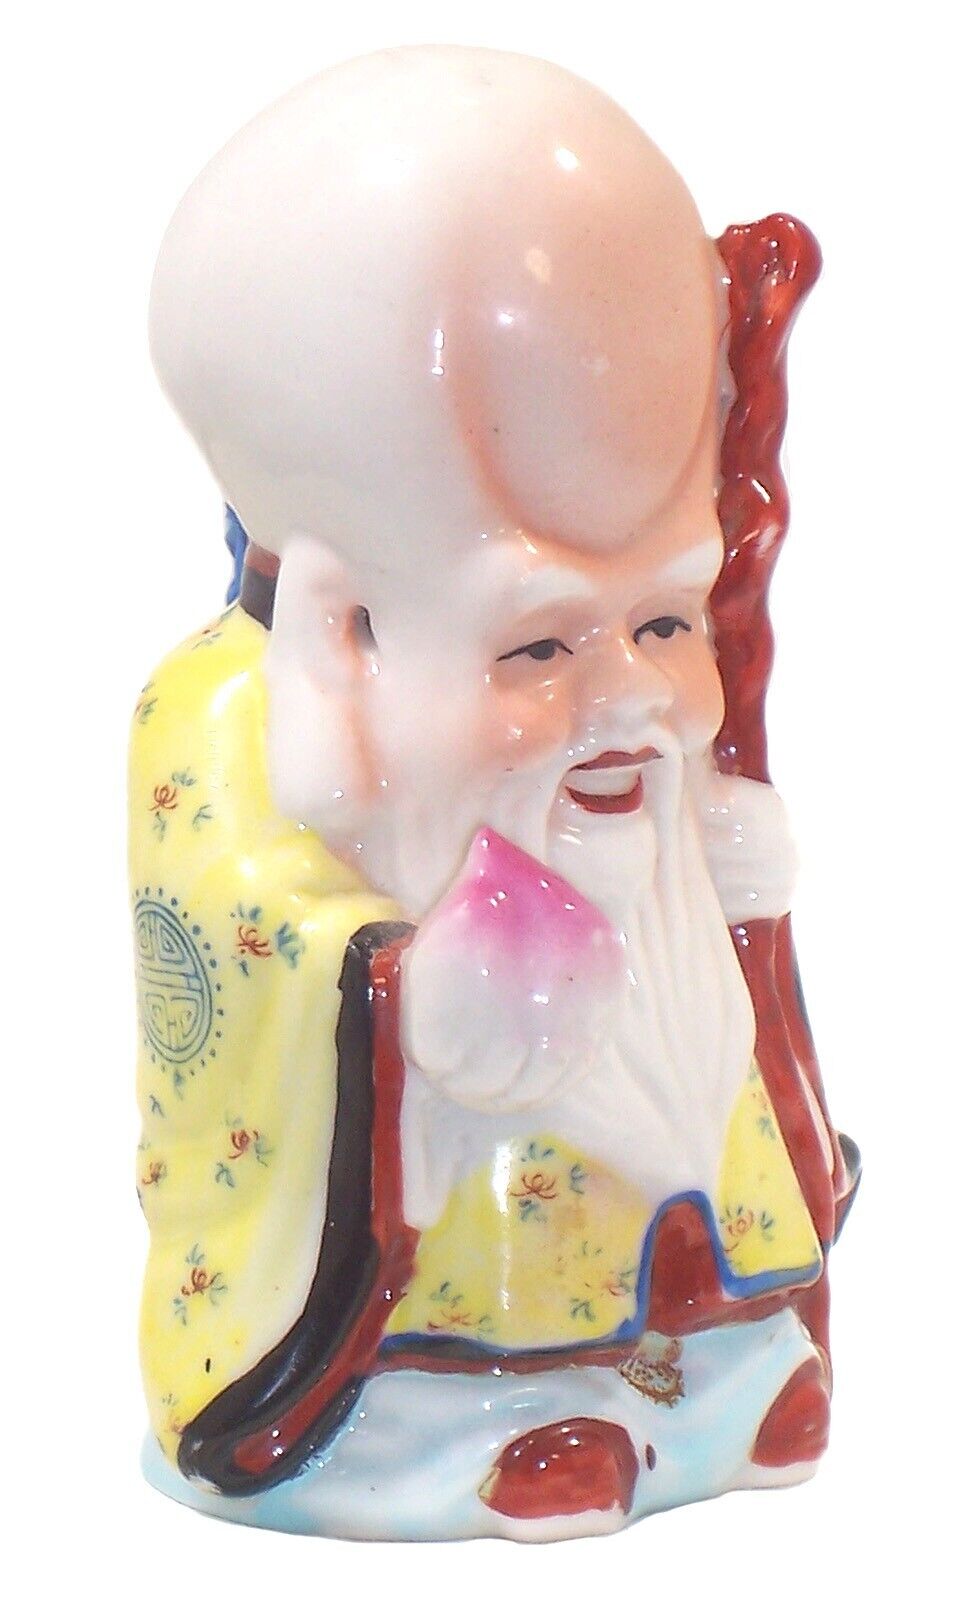 Chinese Porcelain Figurine, Shouxing the God of Longevity 4 ¾” Tall, Vintage